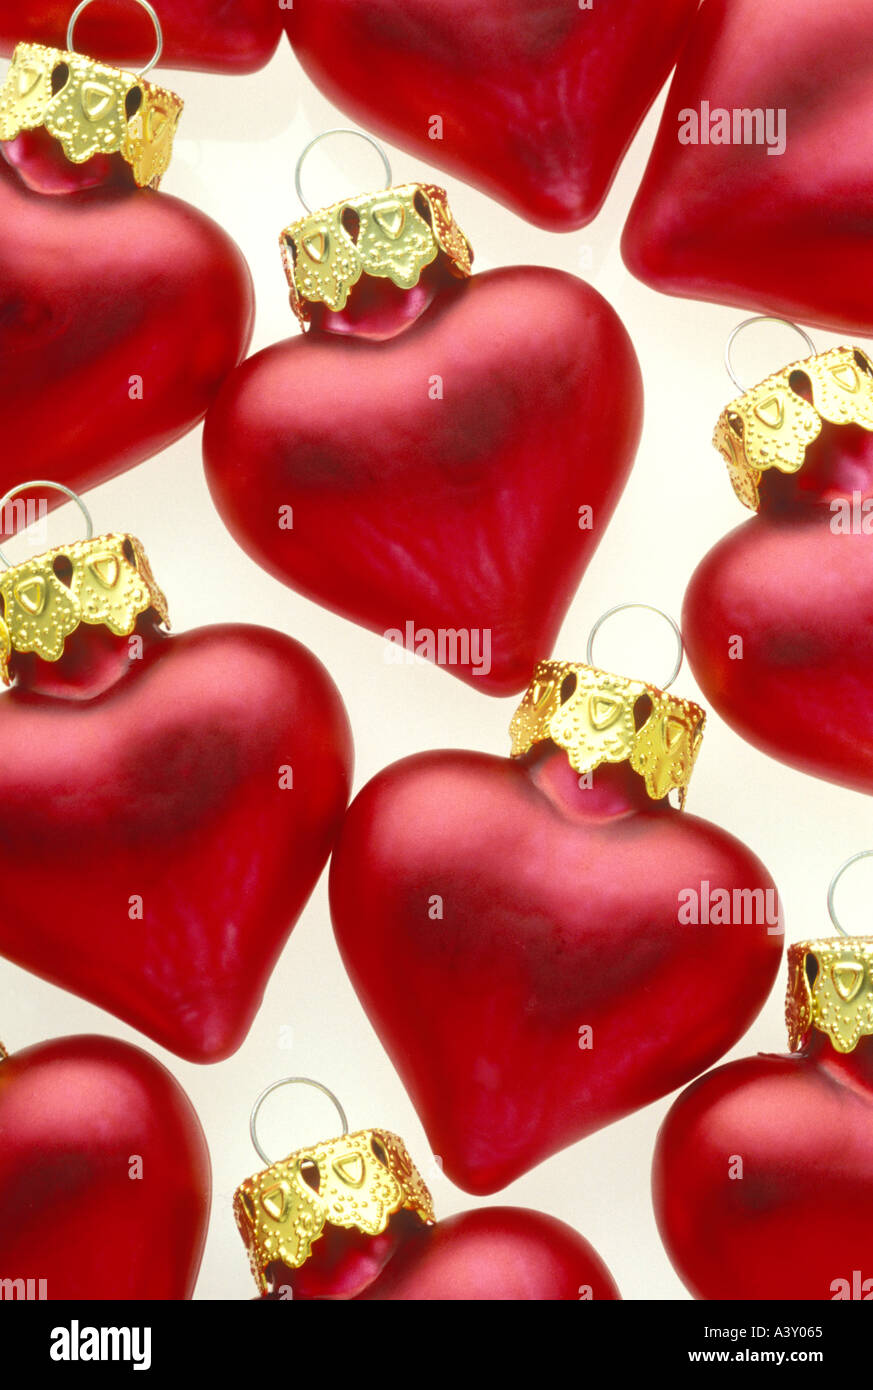 Red heart shaped Christmas ornaments Stock Photo